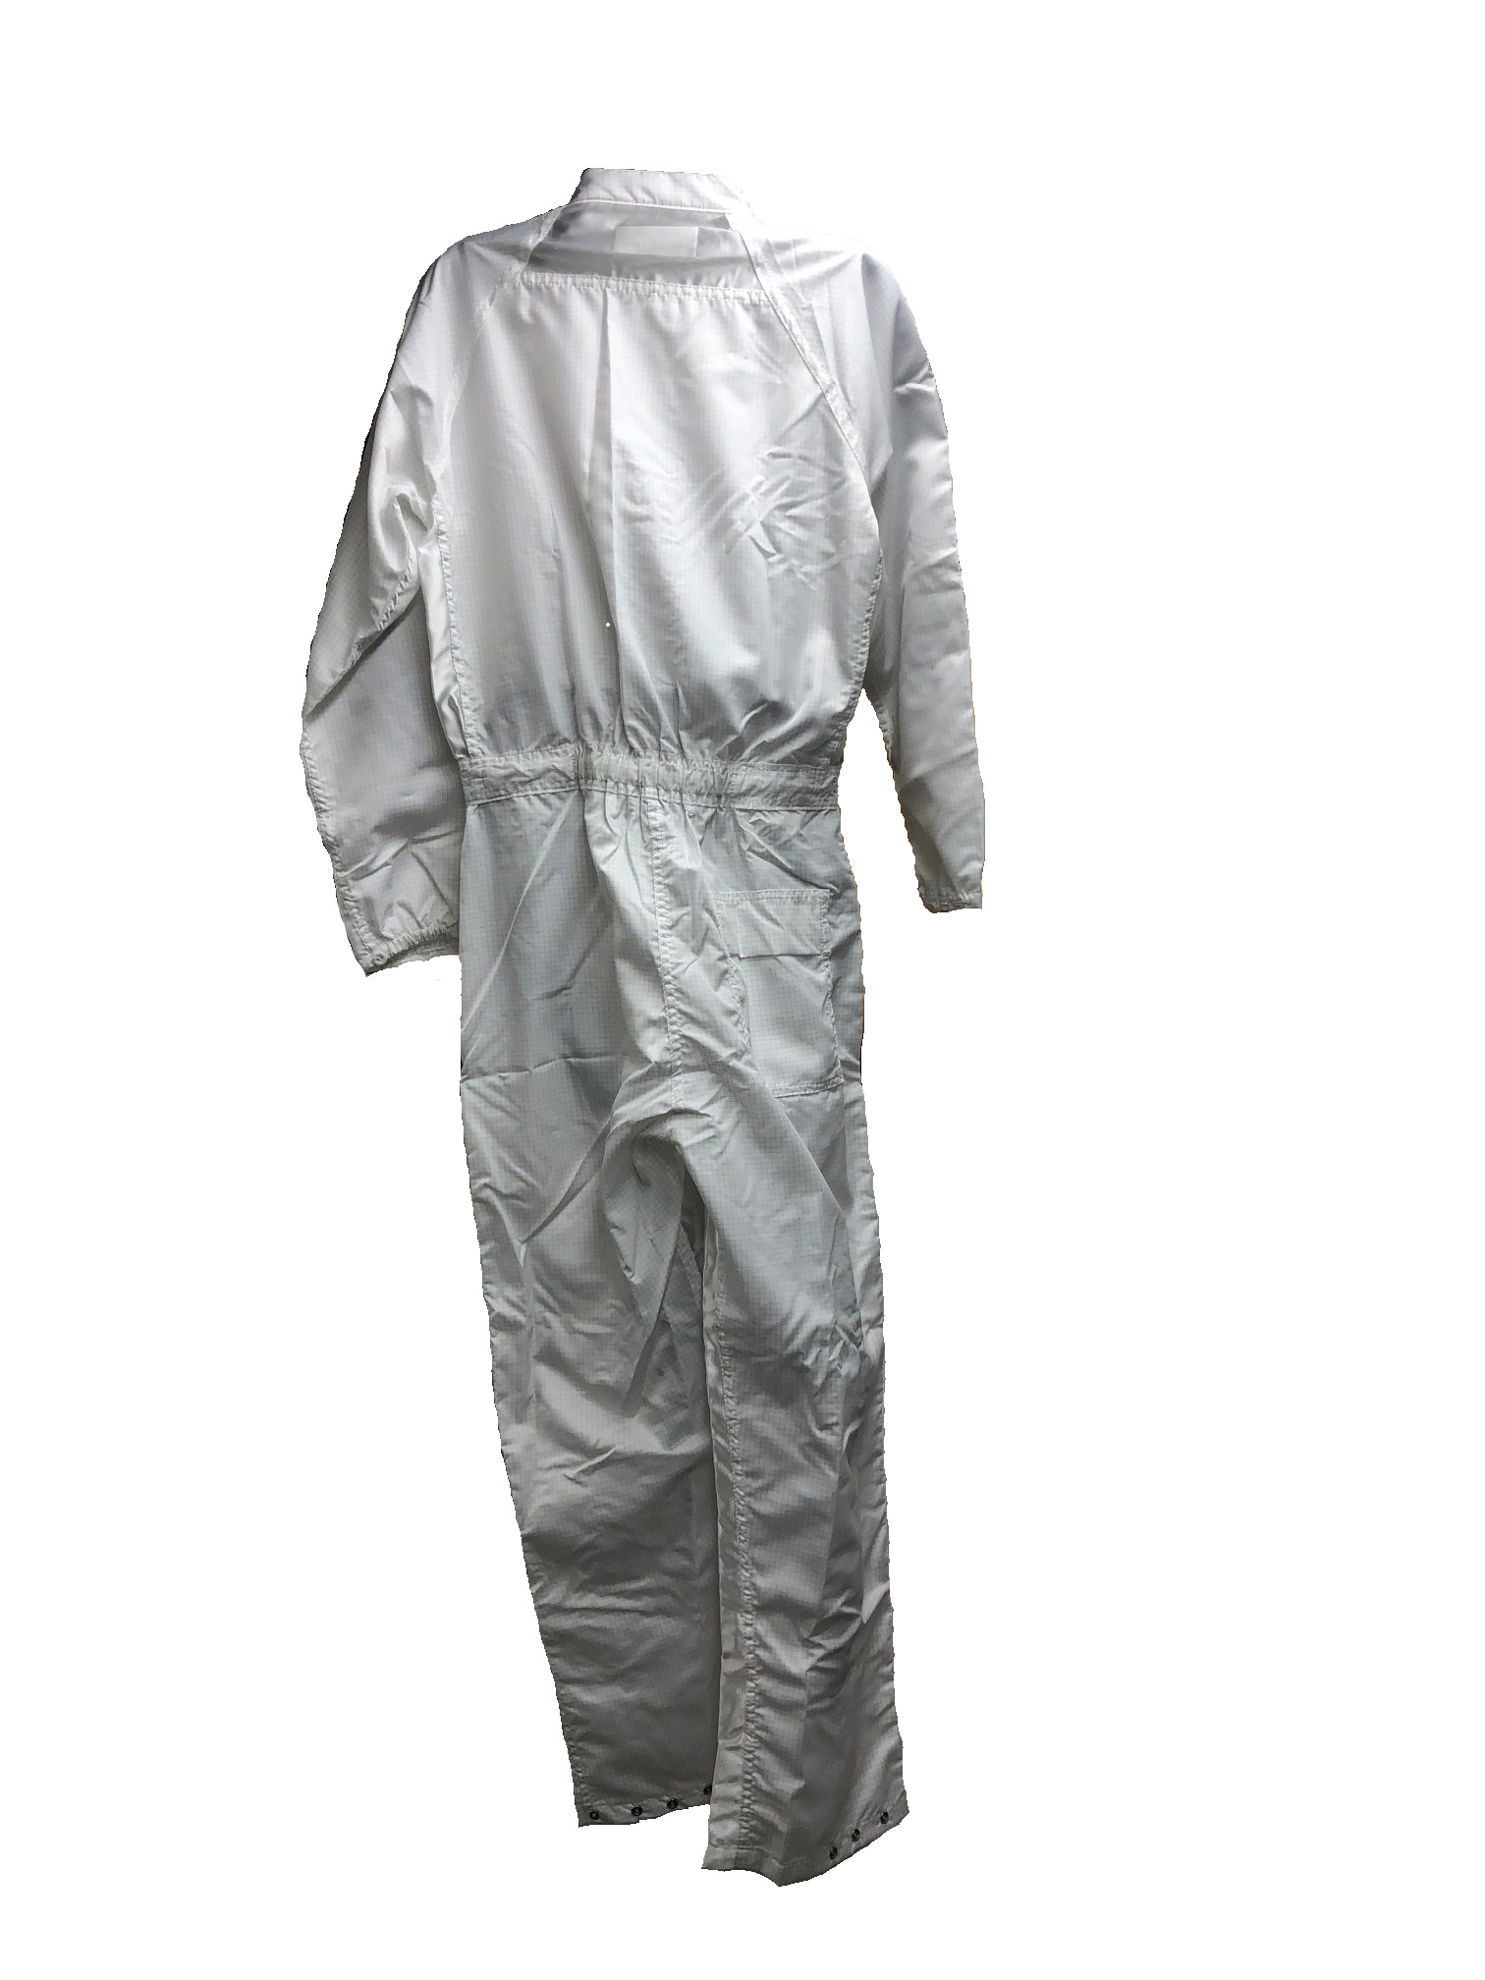 General Motors Paint Room Coverall-White (1st Quality) | Buy Quality ...